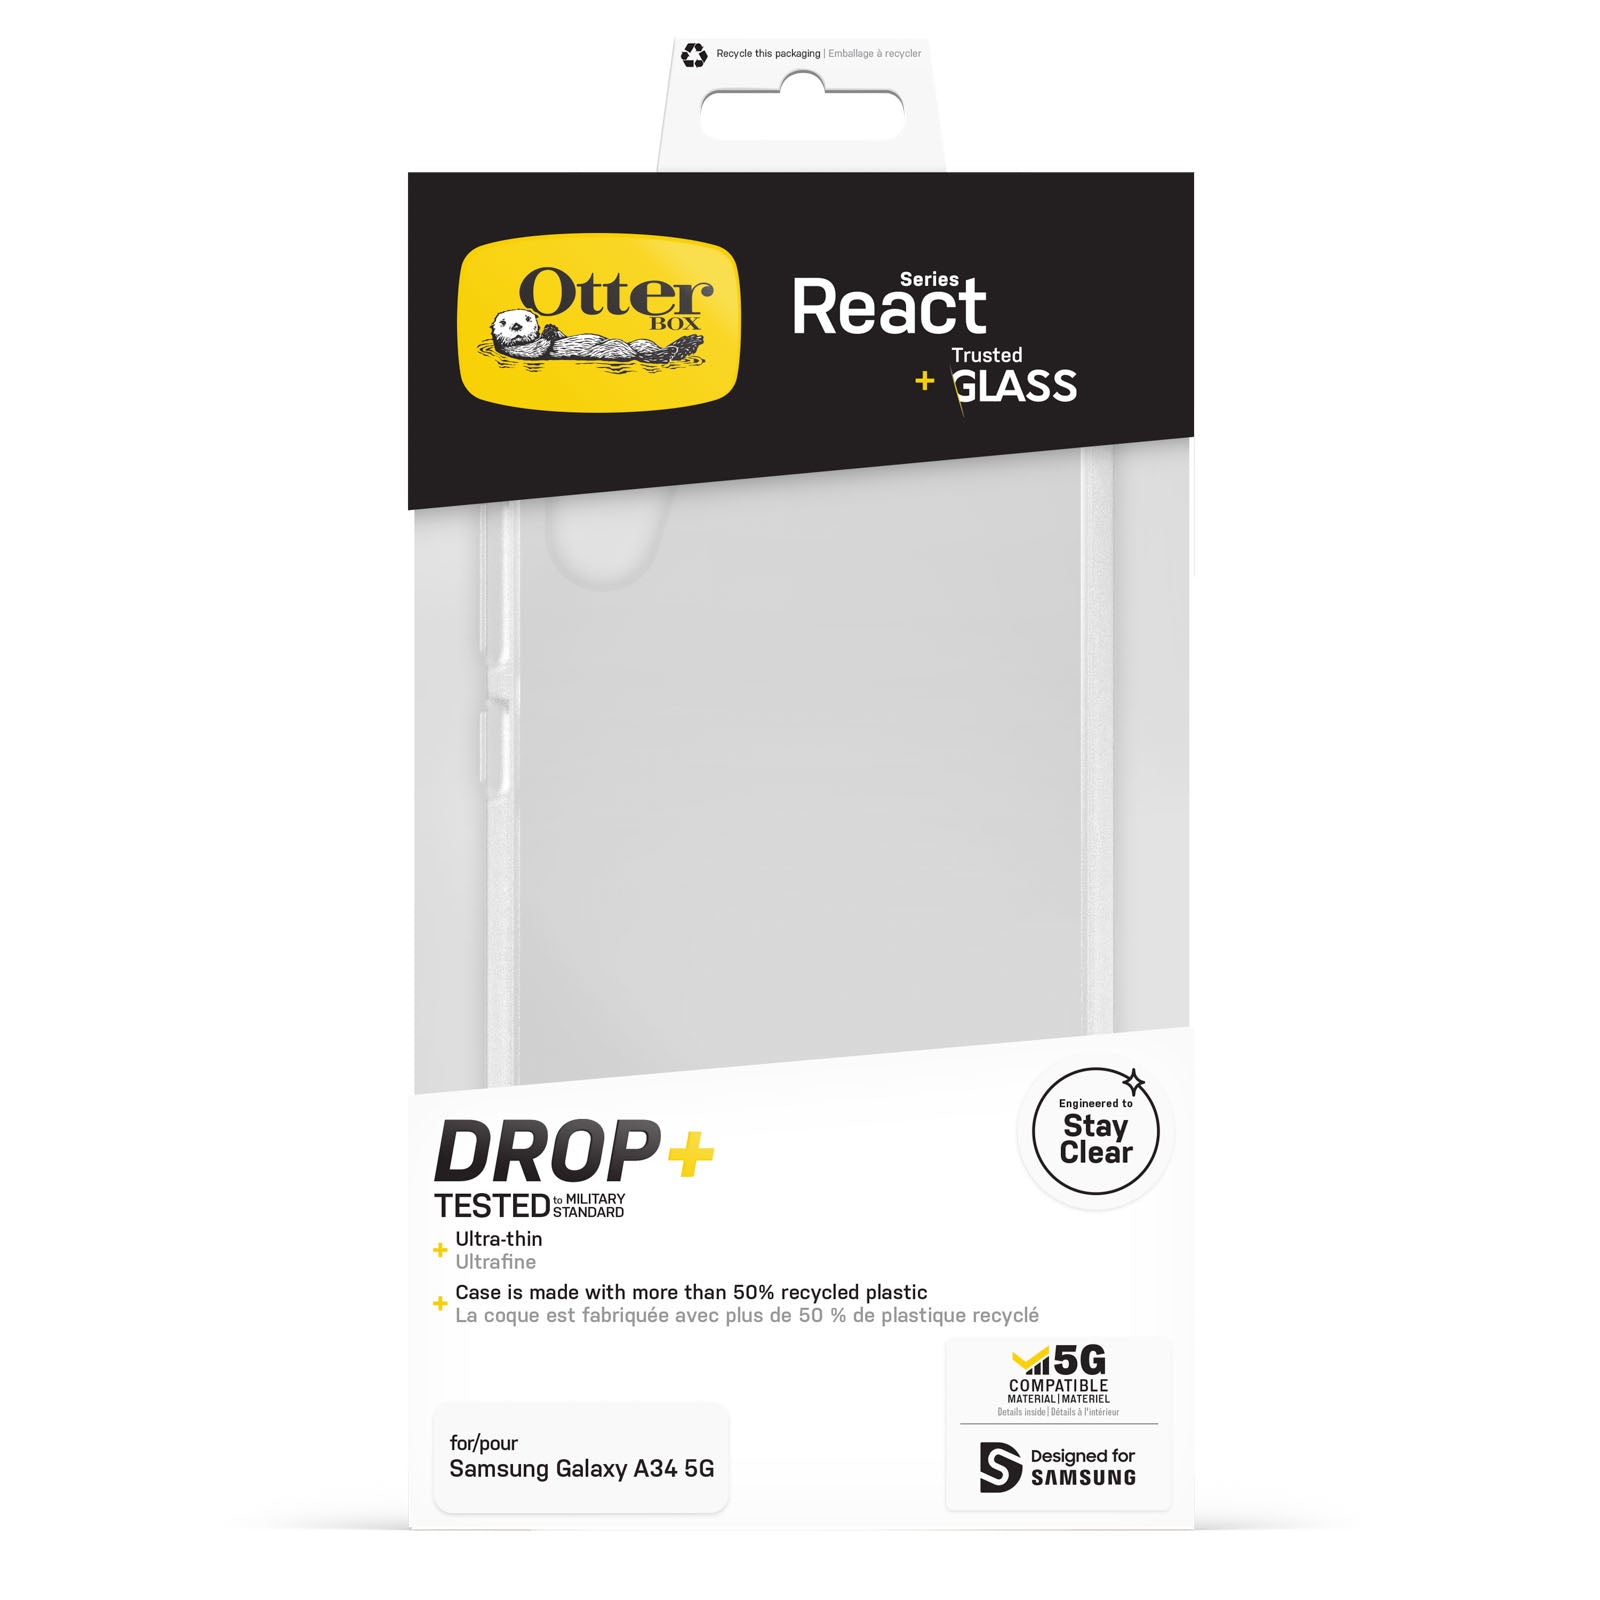 OtterBox Drop Protection Bundle for Galaxy A34 5G; React Clear Case Tested to Military Standard and Trusted Glass Screen Protector 2x Antiscratch Technology